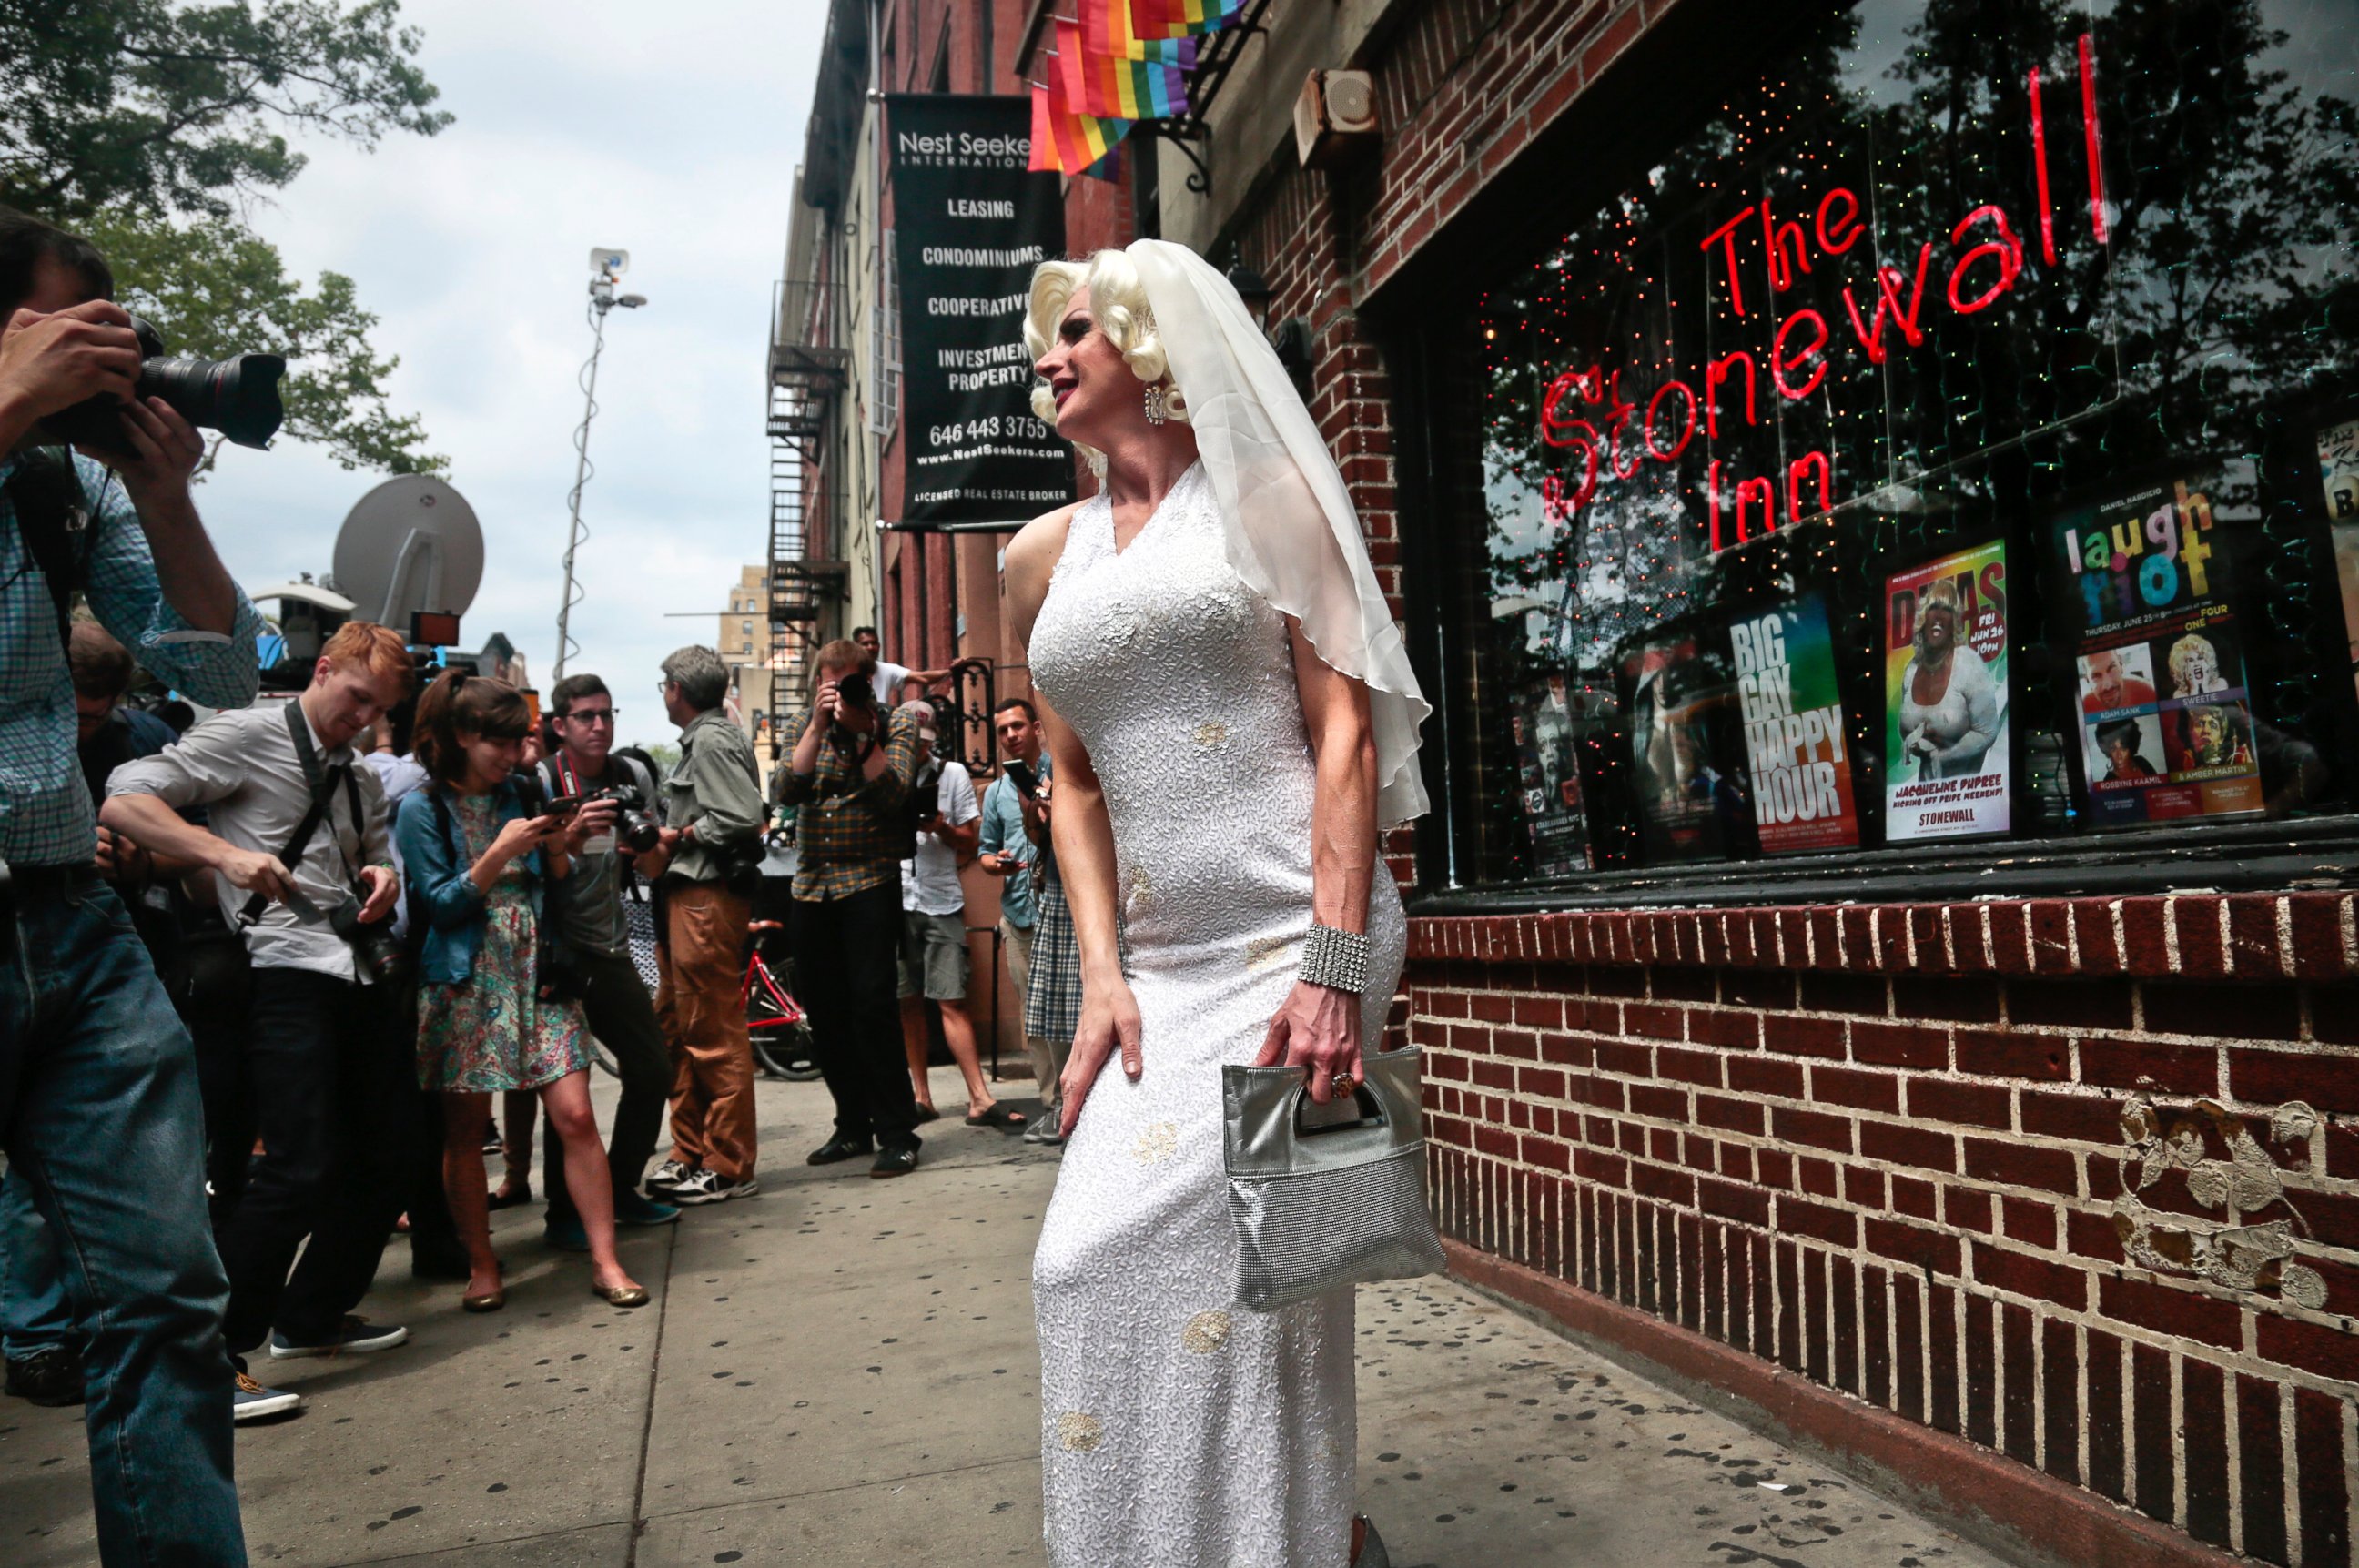 PHOTO: Carl McDonald, also known as Carllotta Gurl, pose in front of the Stonewall Inn, the iconic Greenwich Village bar credited as the birthplace of the gay rights movement, June 26, 2015, in New York.